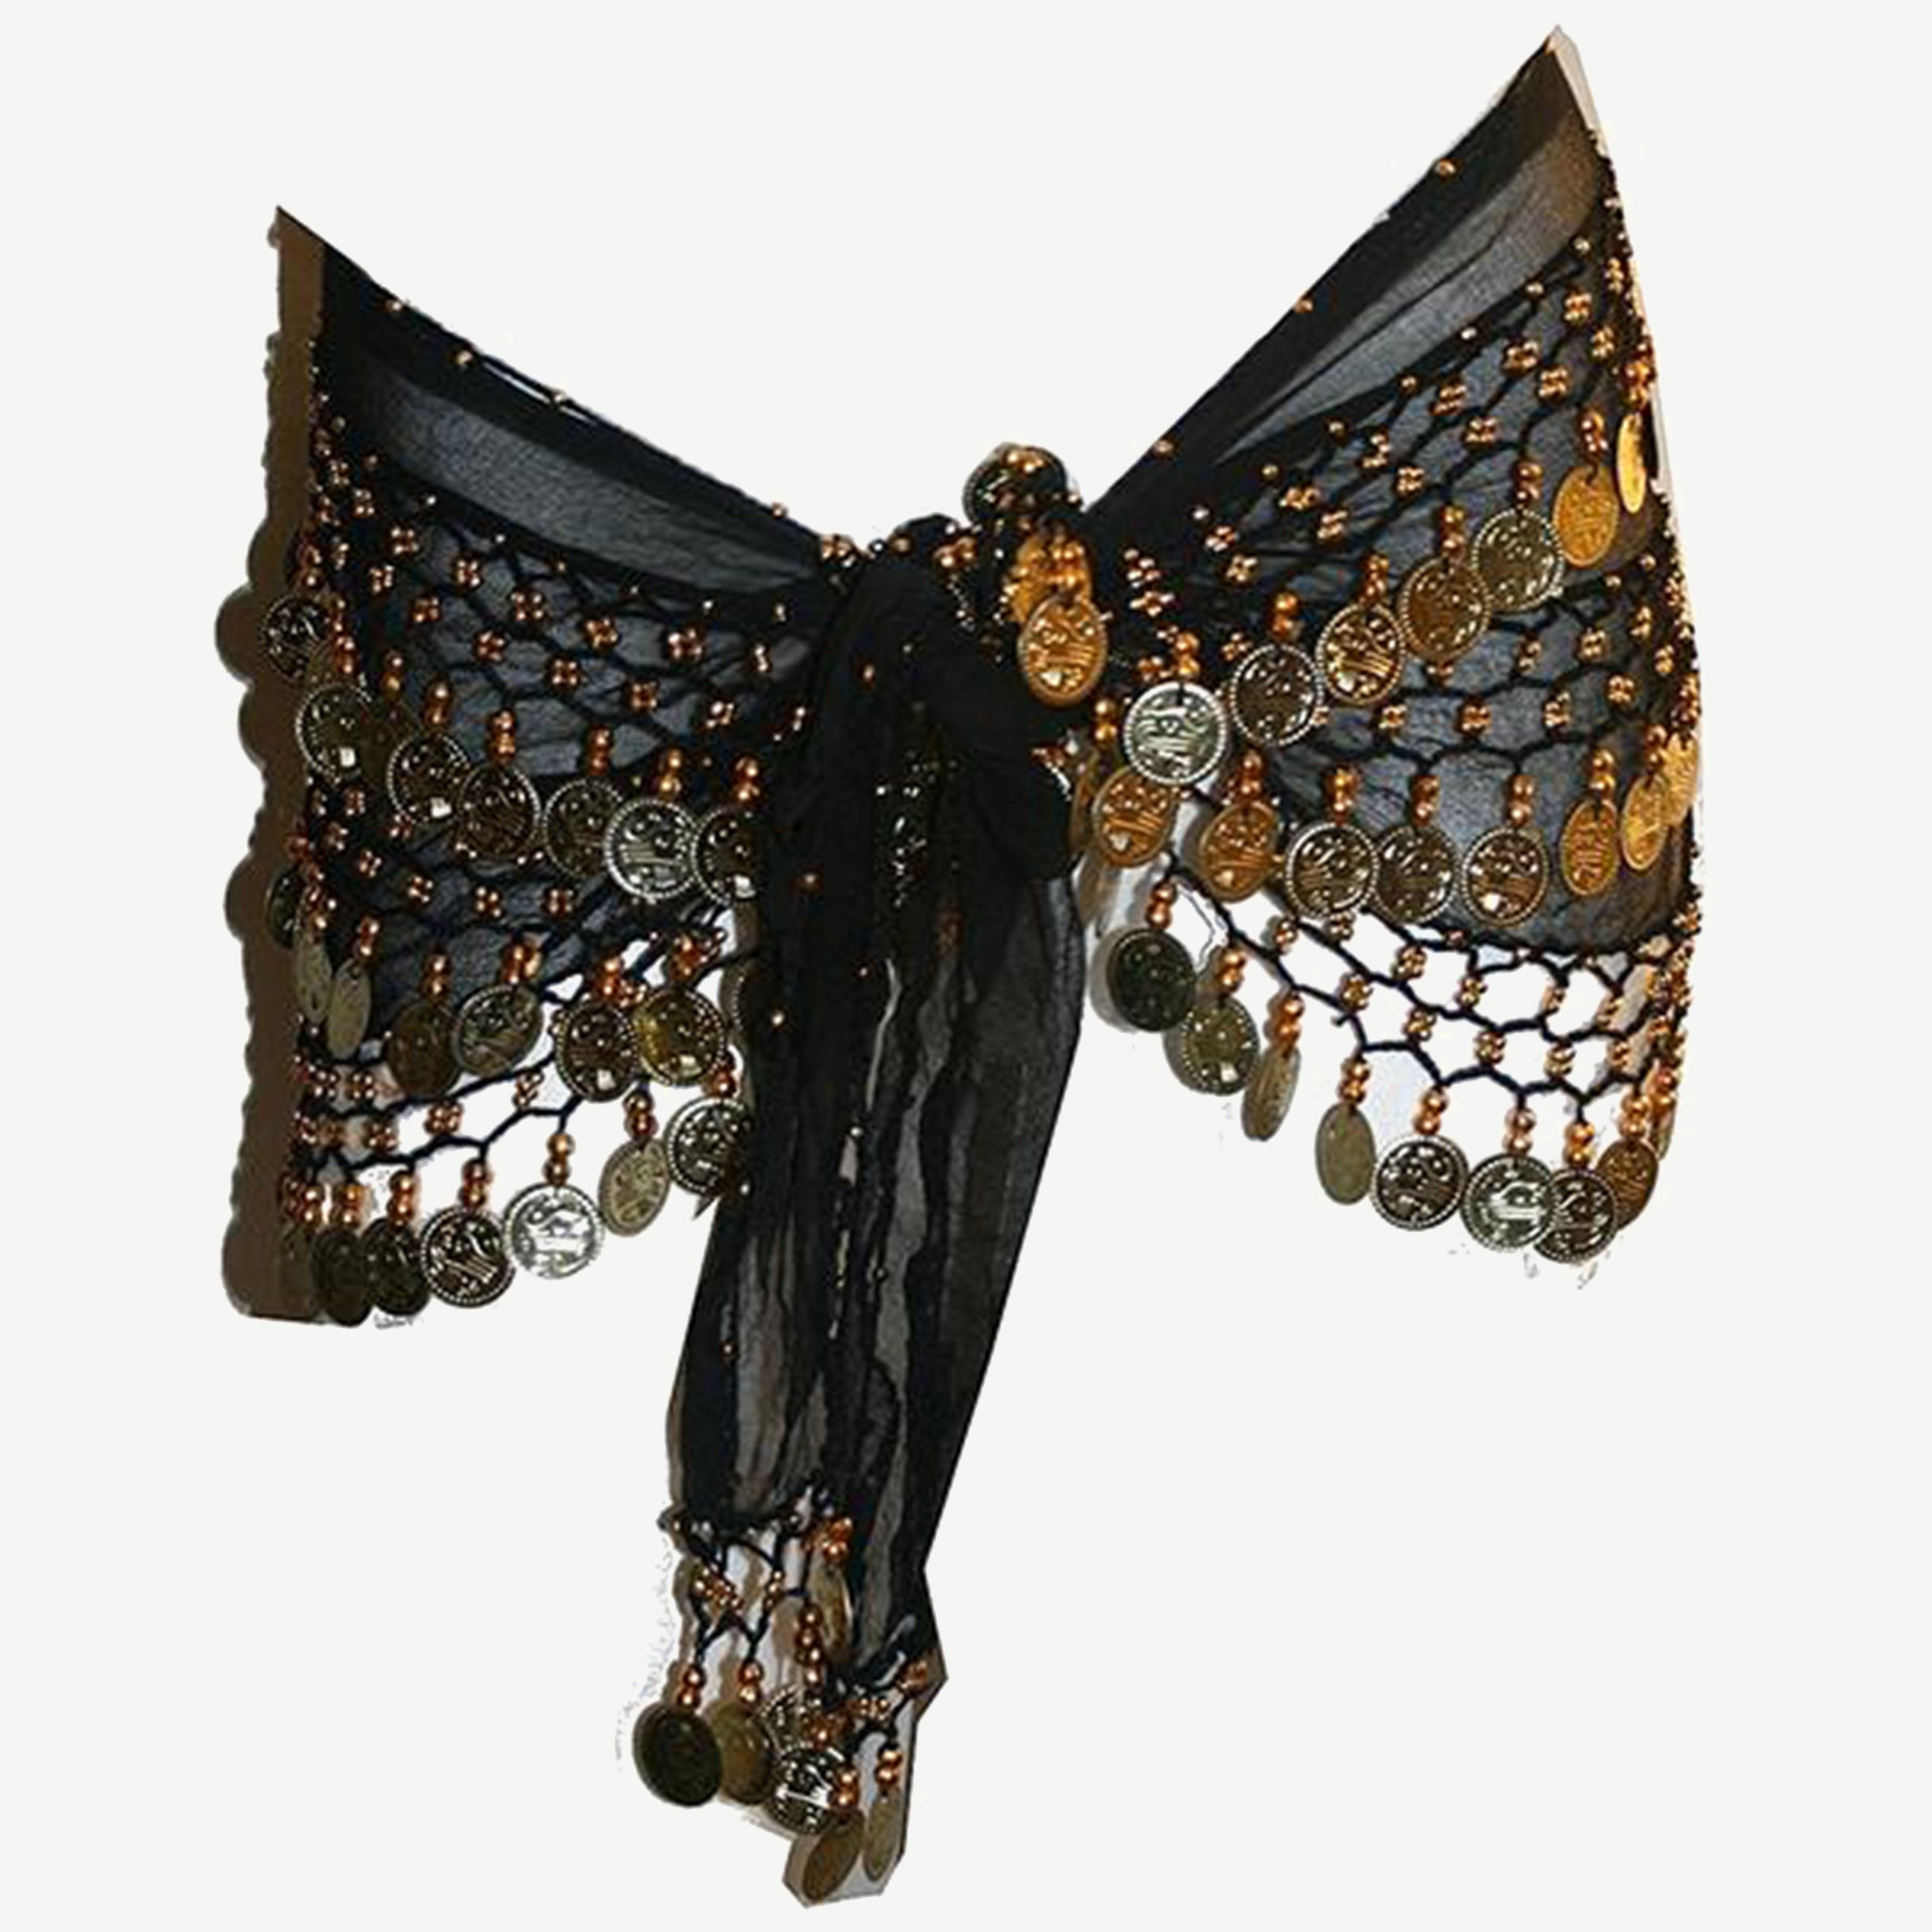 Yellow Belly Dance Hip Scarf, Hand Made Belly Dancing Skirt Coin Sash  Costume With Silver or Gold Coins Free Shipping 